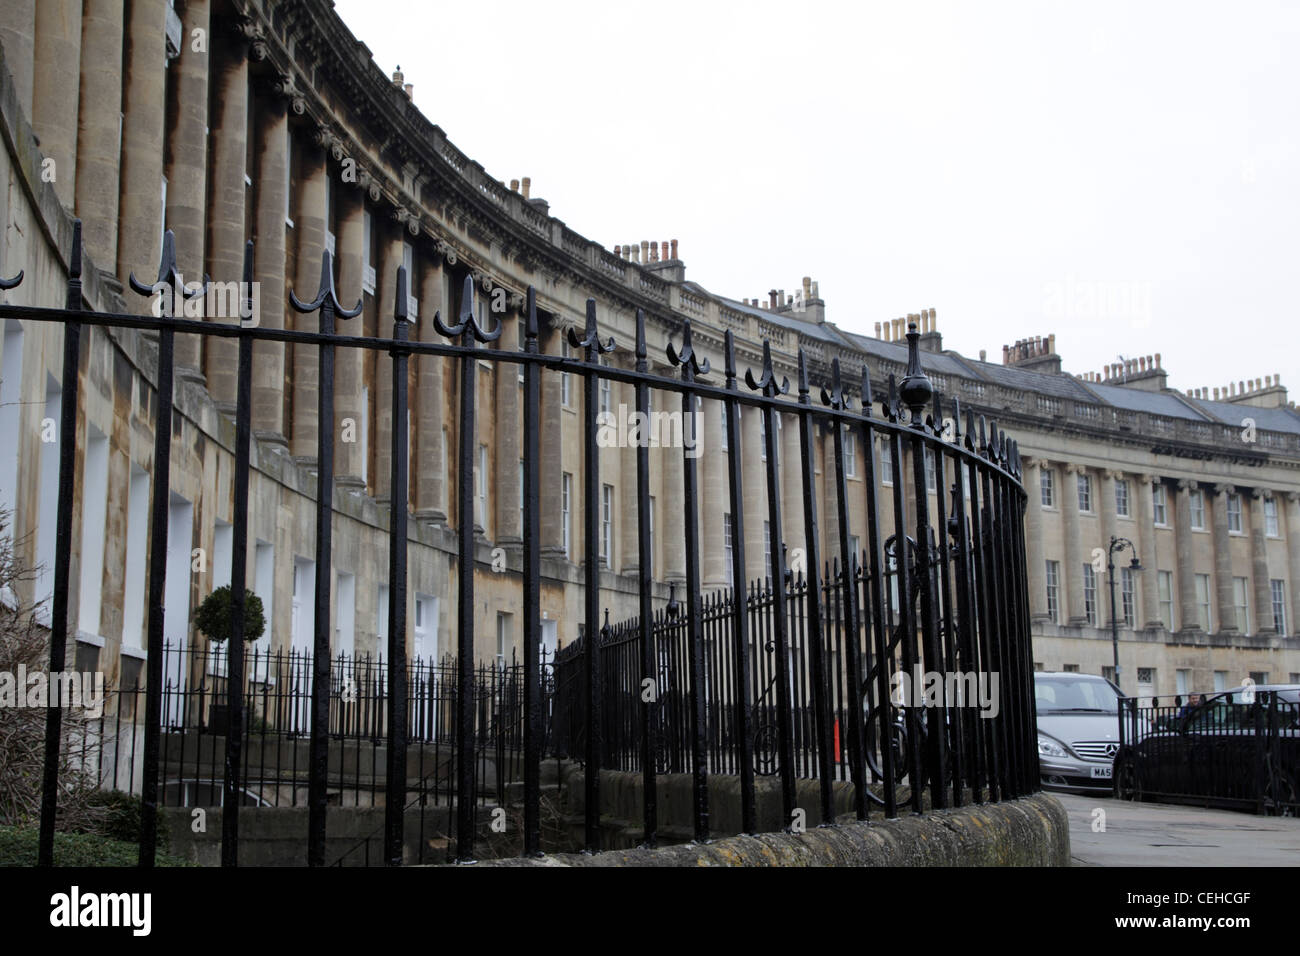 Railings in the Royal Crescent in bath Stock Photo